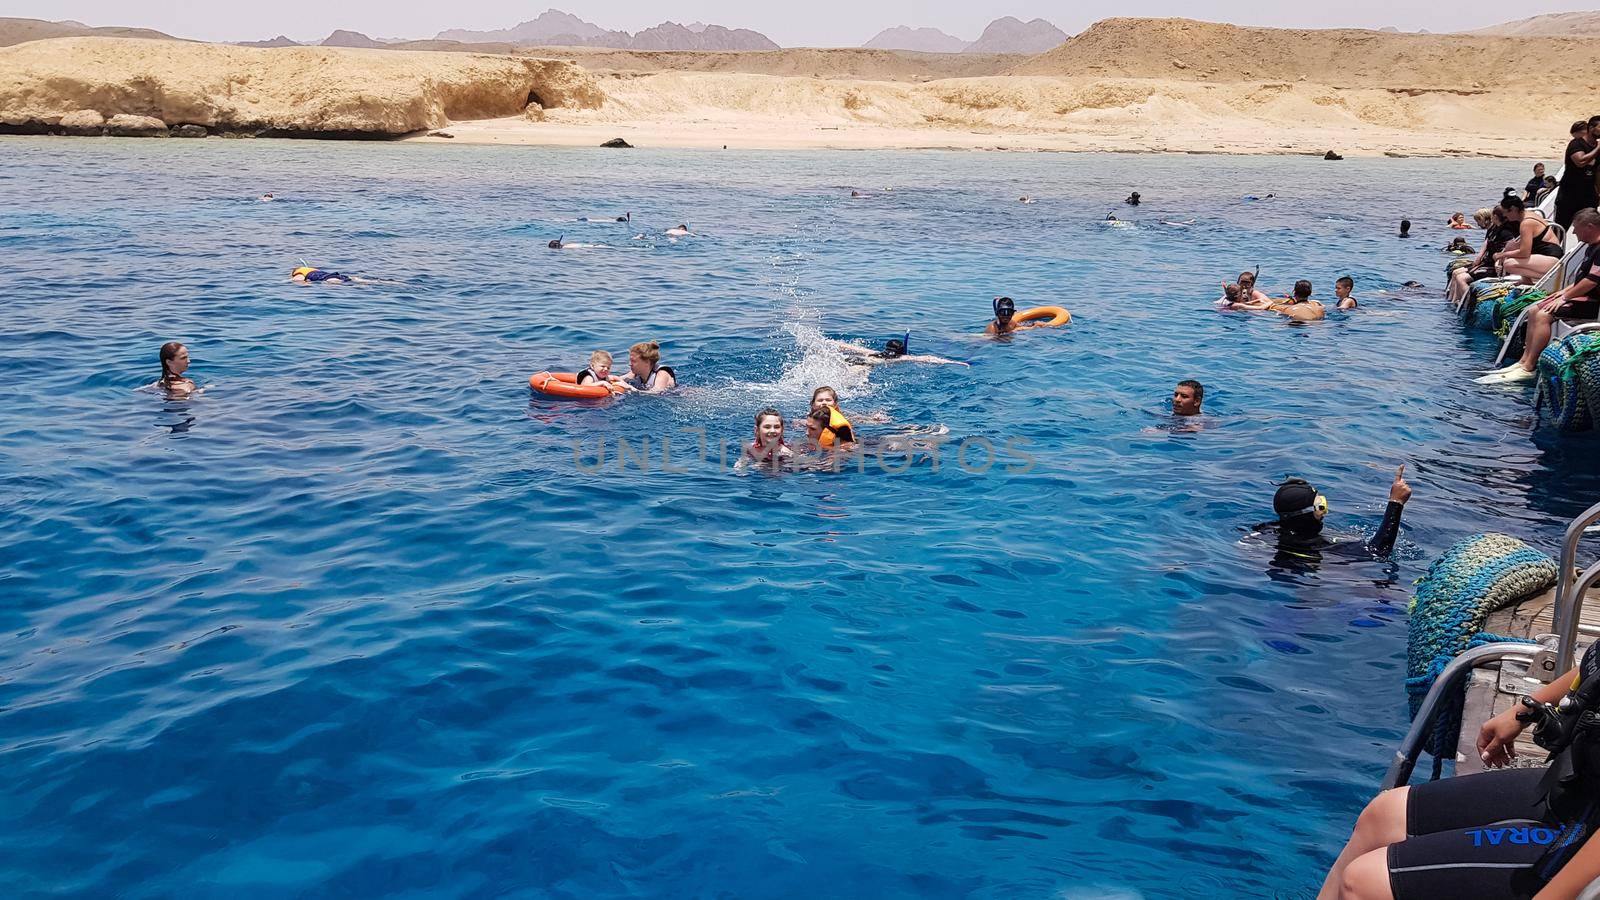 Egypt, Sharm El Sheikh - September 20, 2019: A group of tourists diving with a mask and snorkel are looking at the beautiful and colorful sea fish and coral reef in the Red Sea near the ship